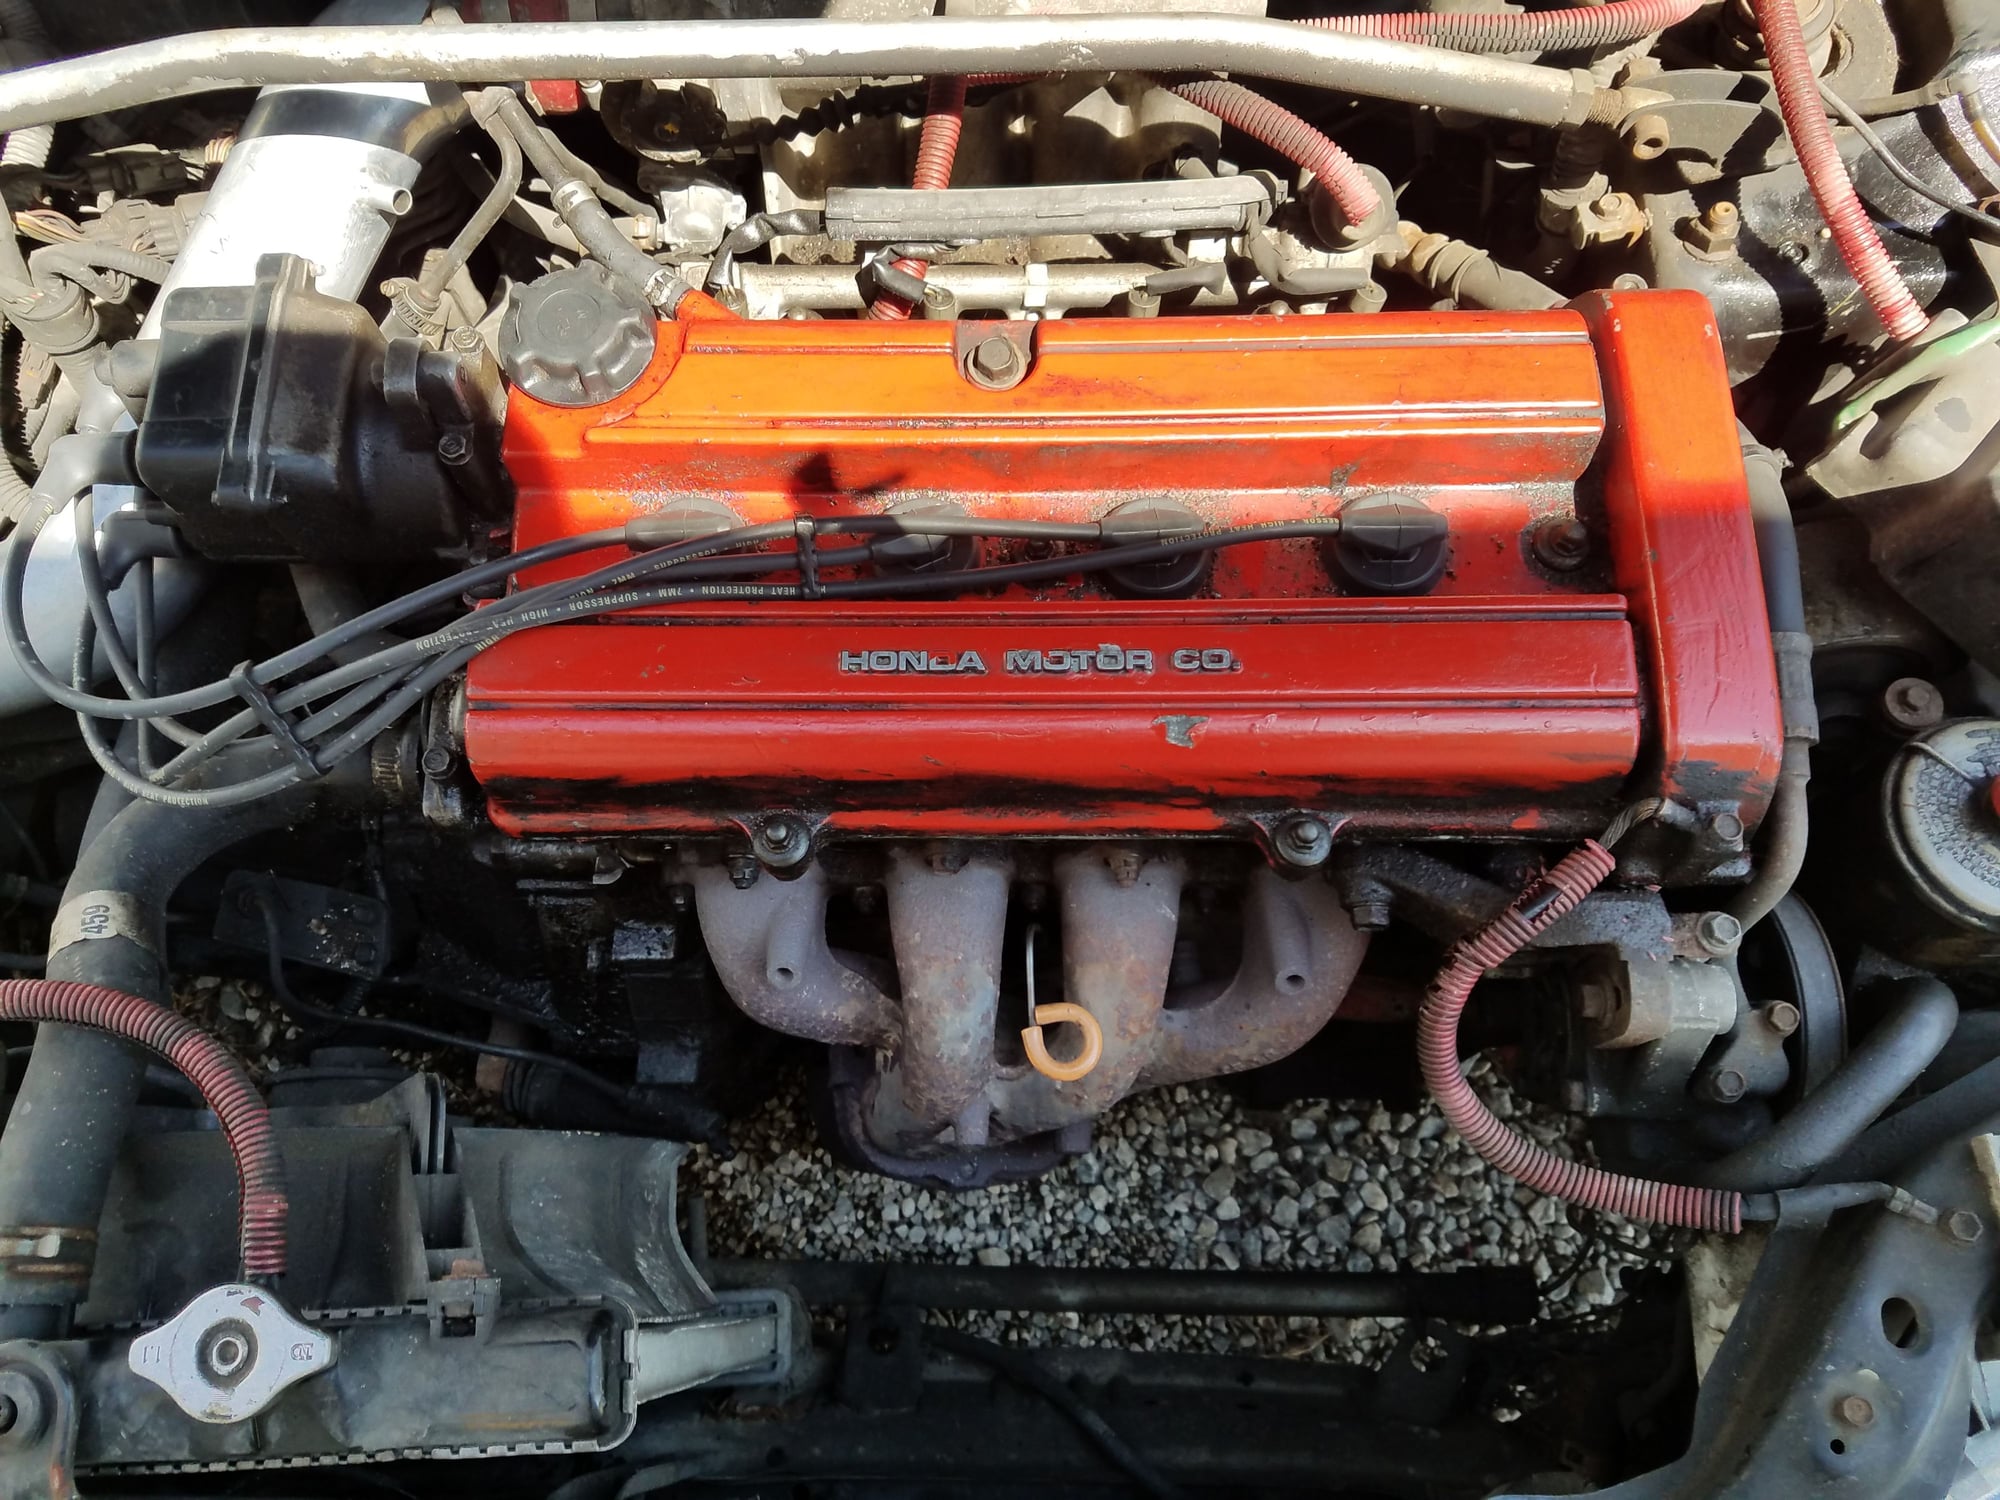 What motor is this? - The unofficial Honda Forum and Discussion Board